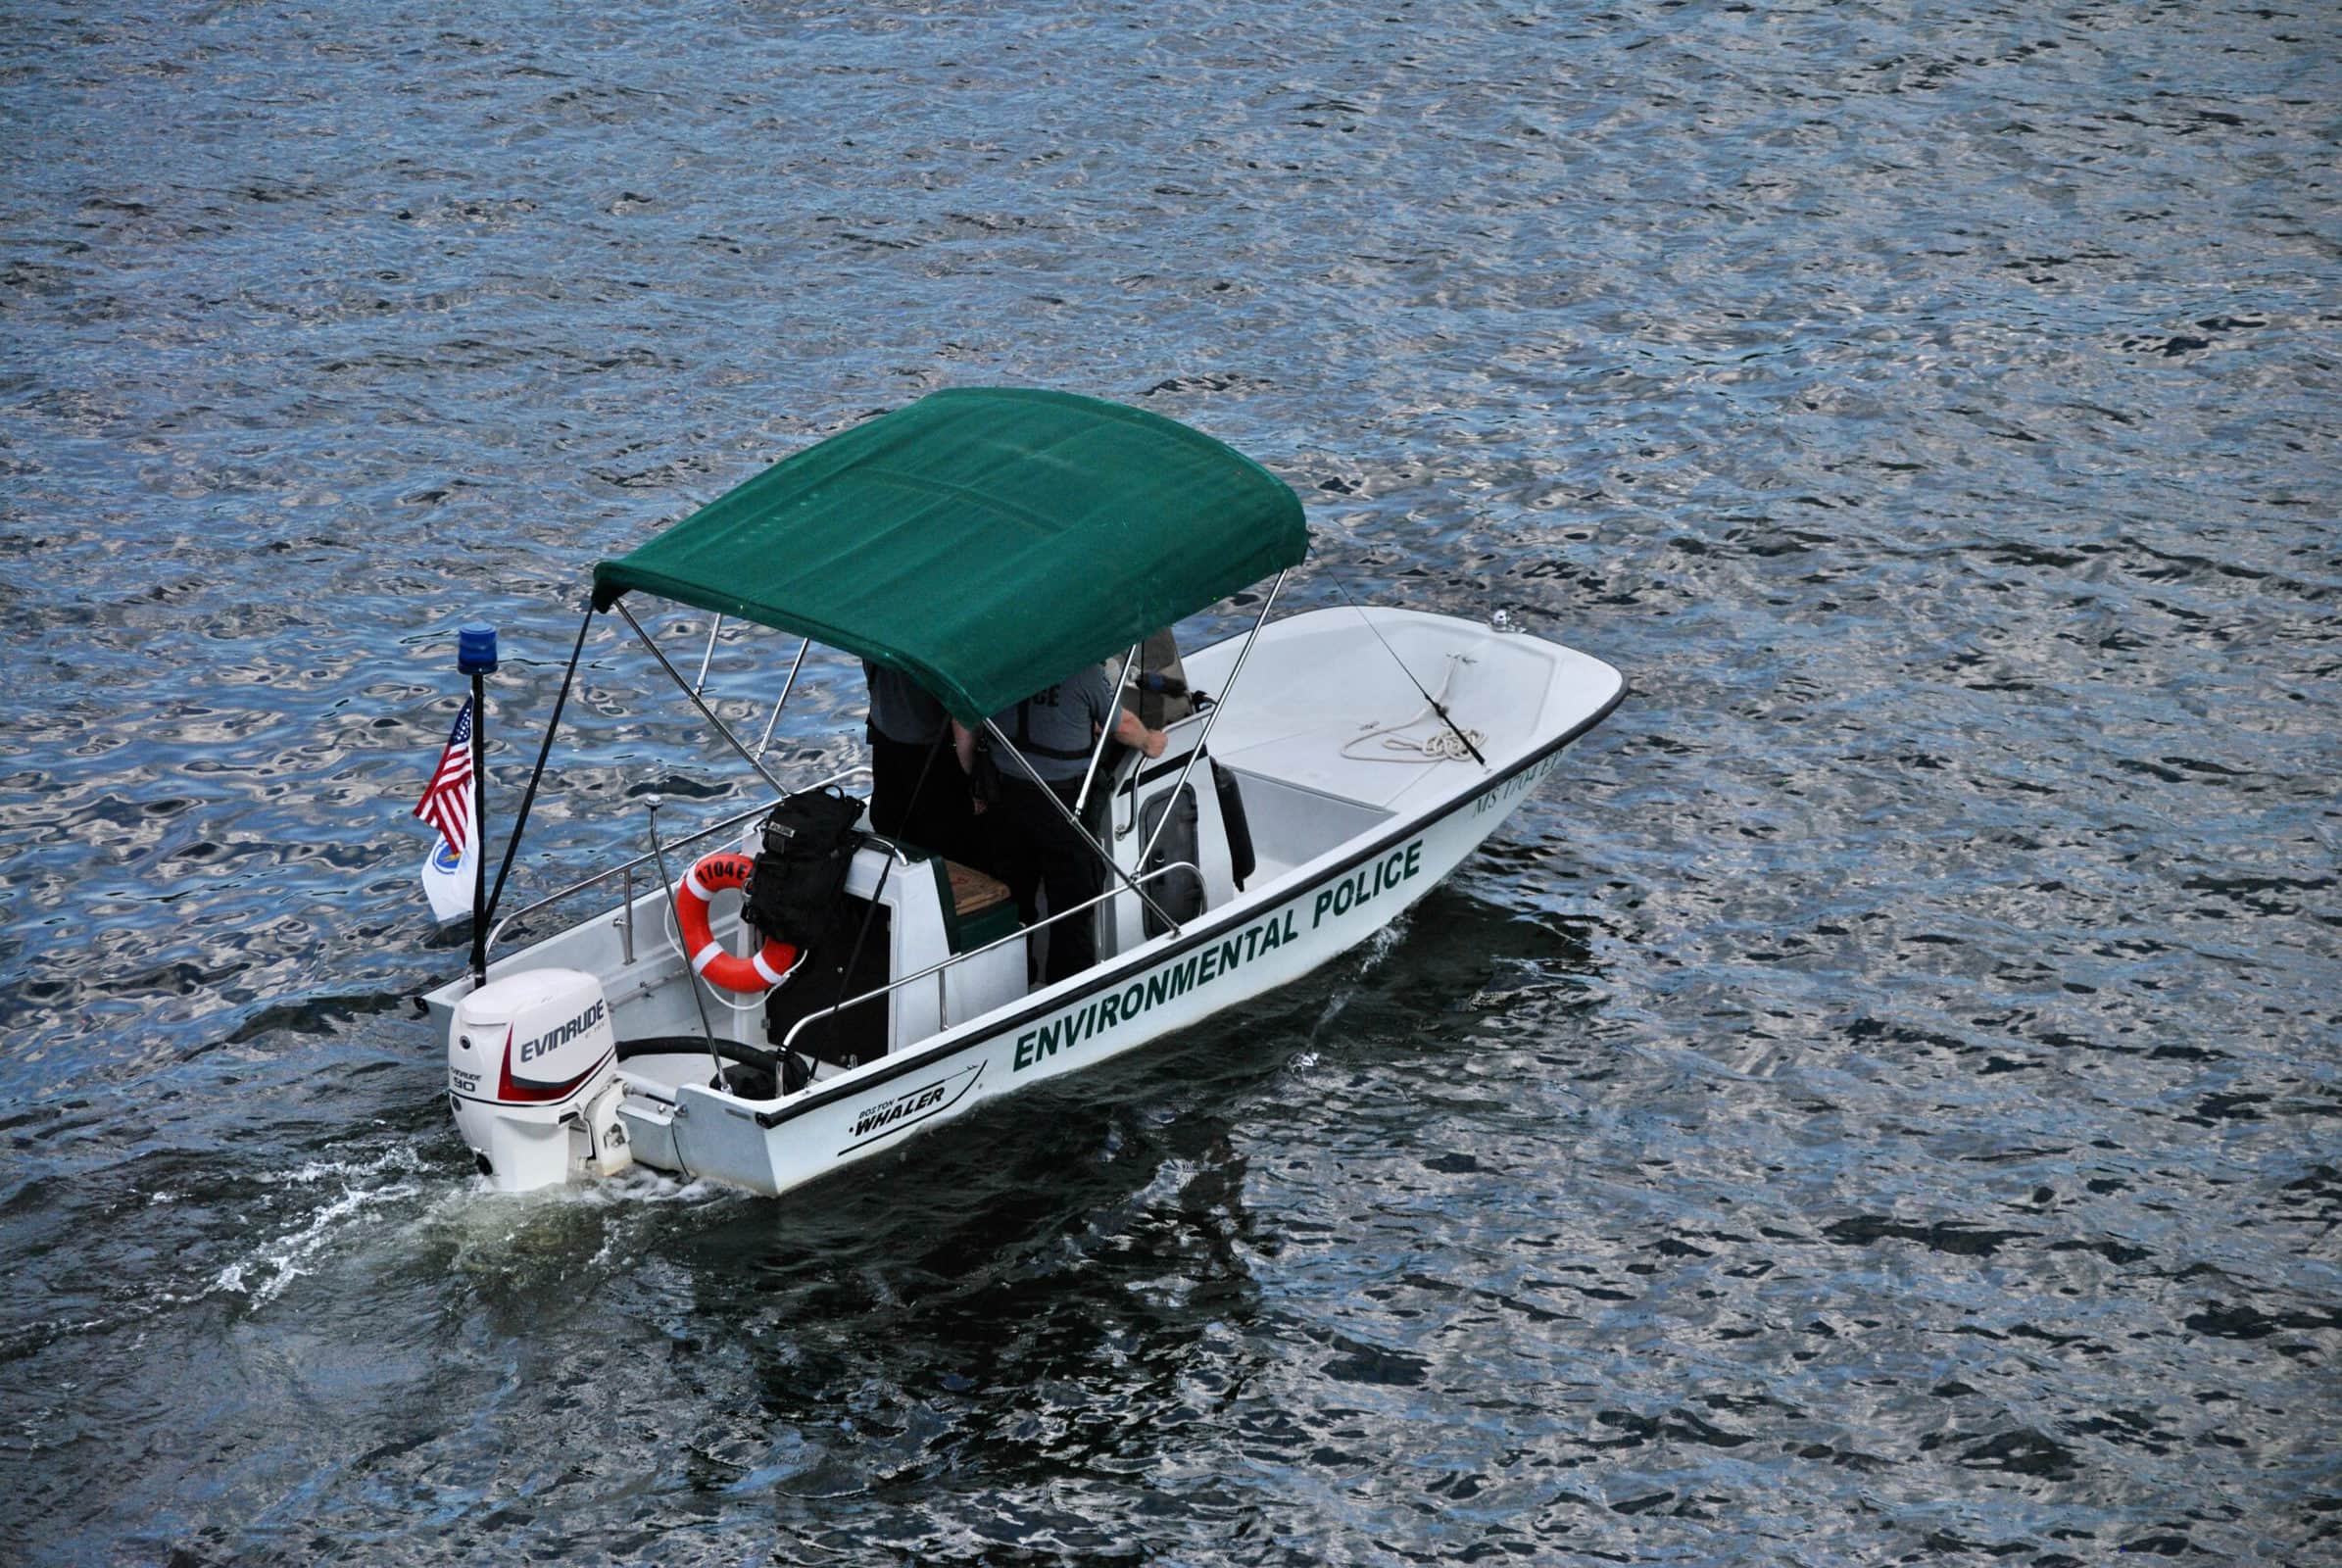 New task force focuses on Lake Quinsigamond safety